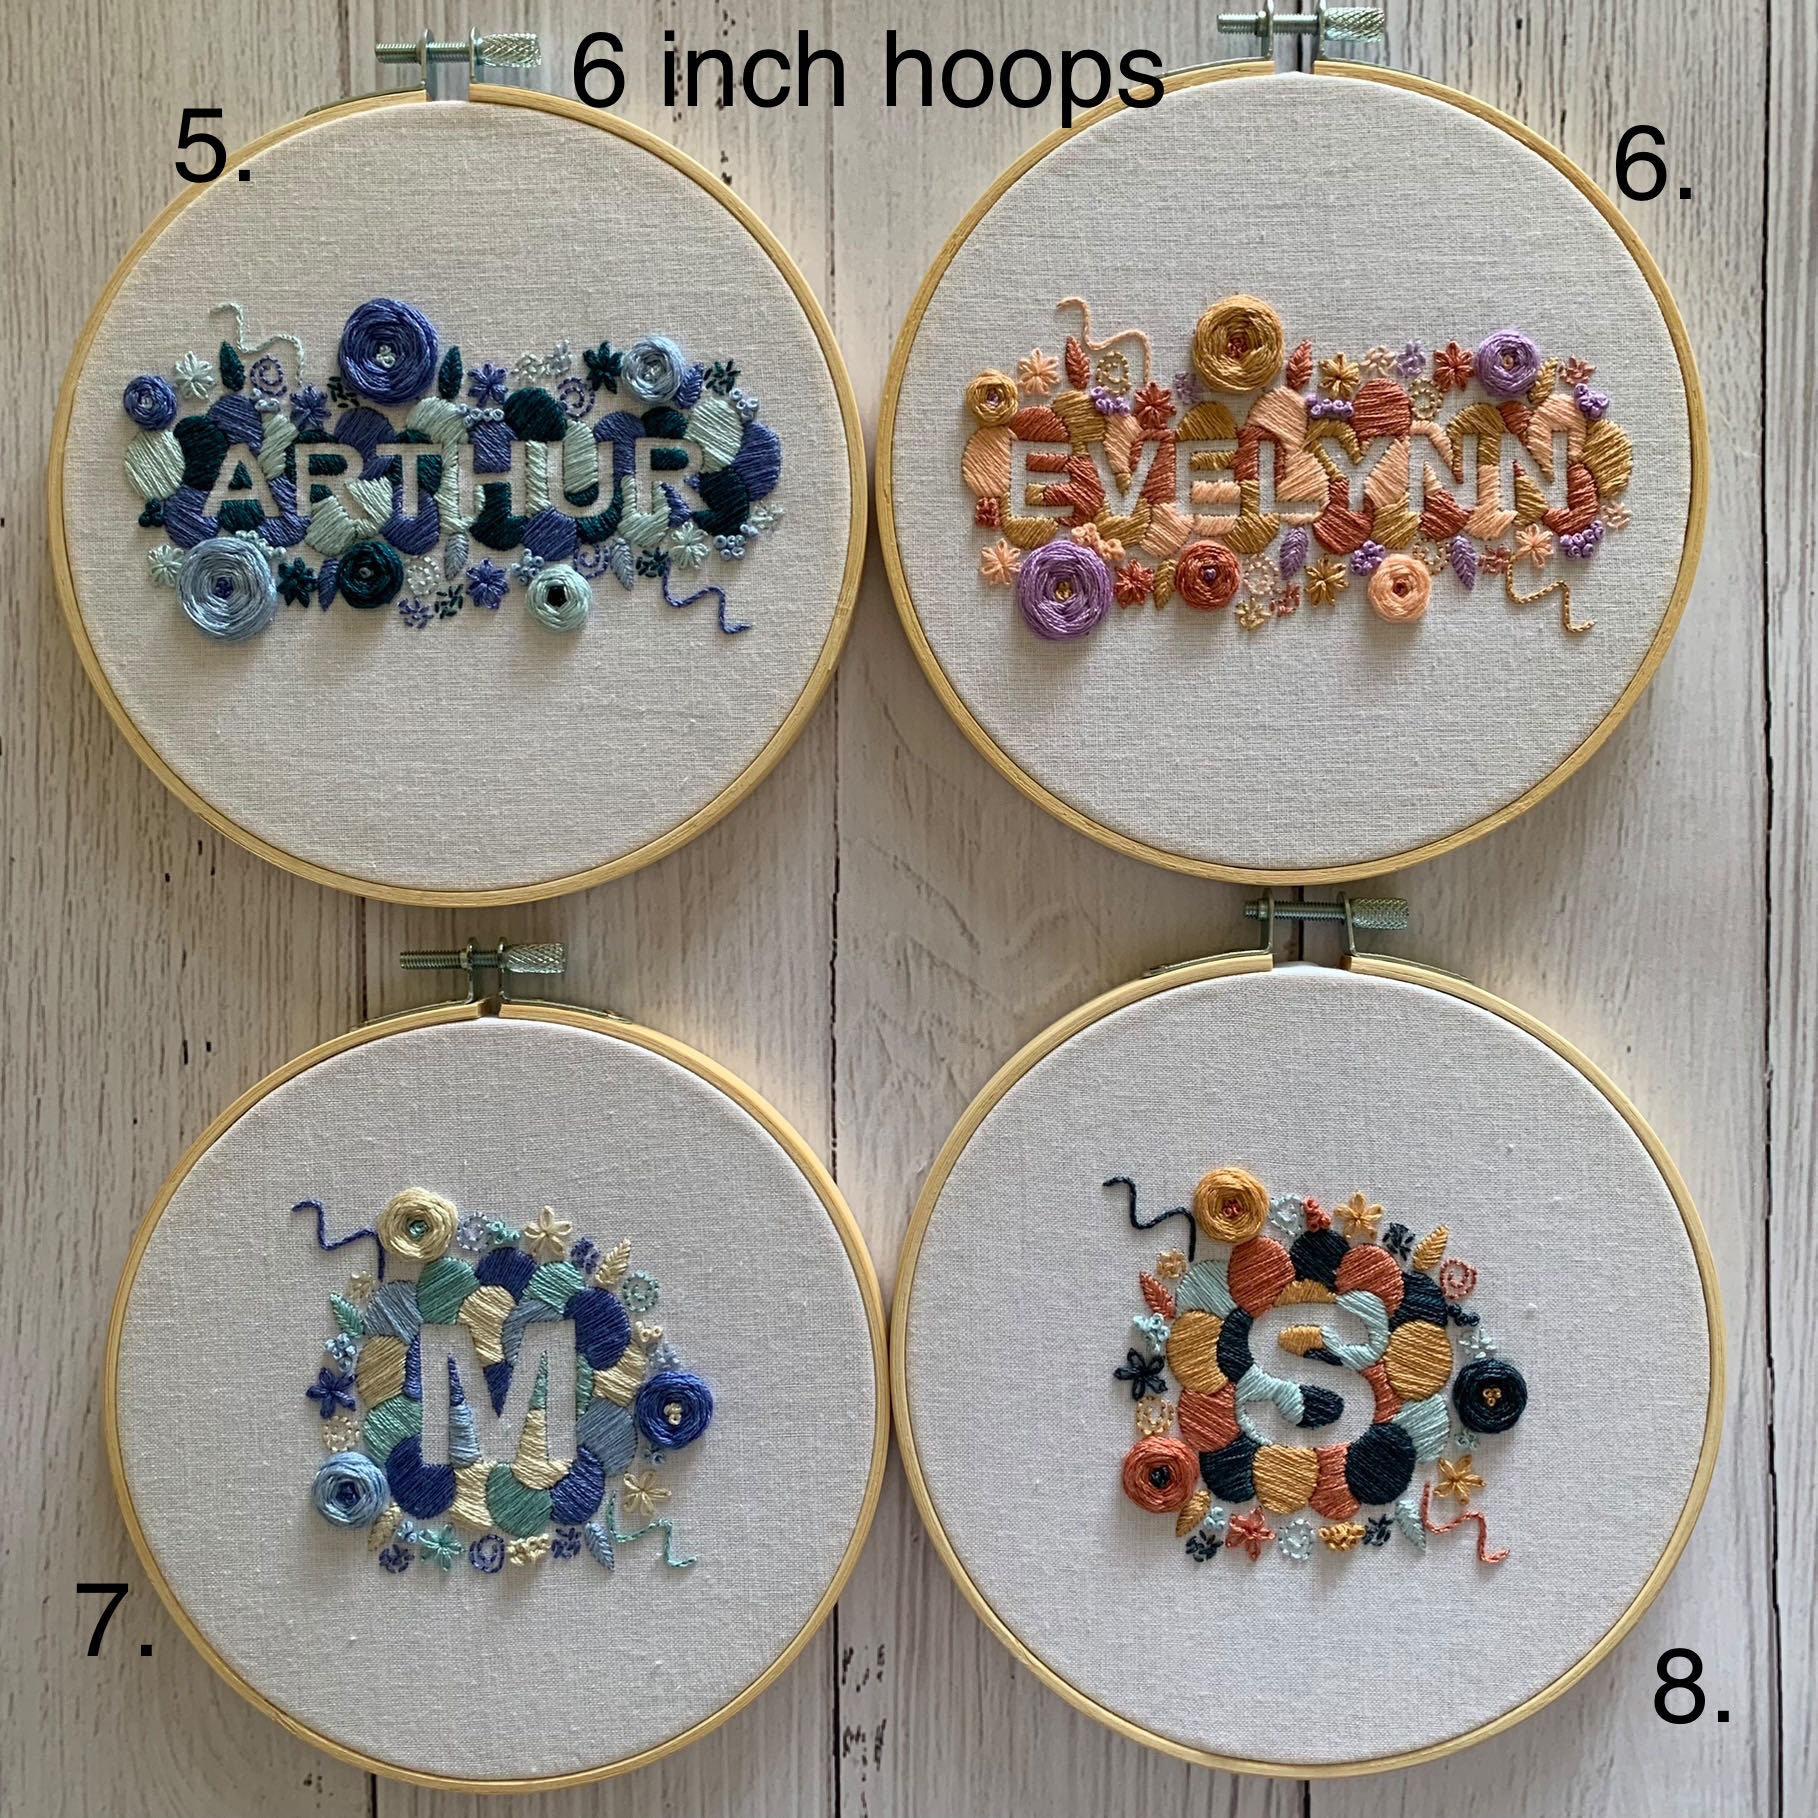 Mini embroidery hoops! Each is about the size of a quarter but I ran out of  hoops for the peace sign one. I plan on selling them at a craft fair as